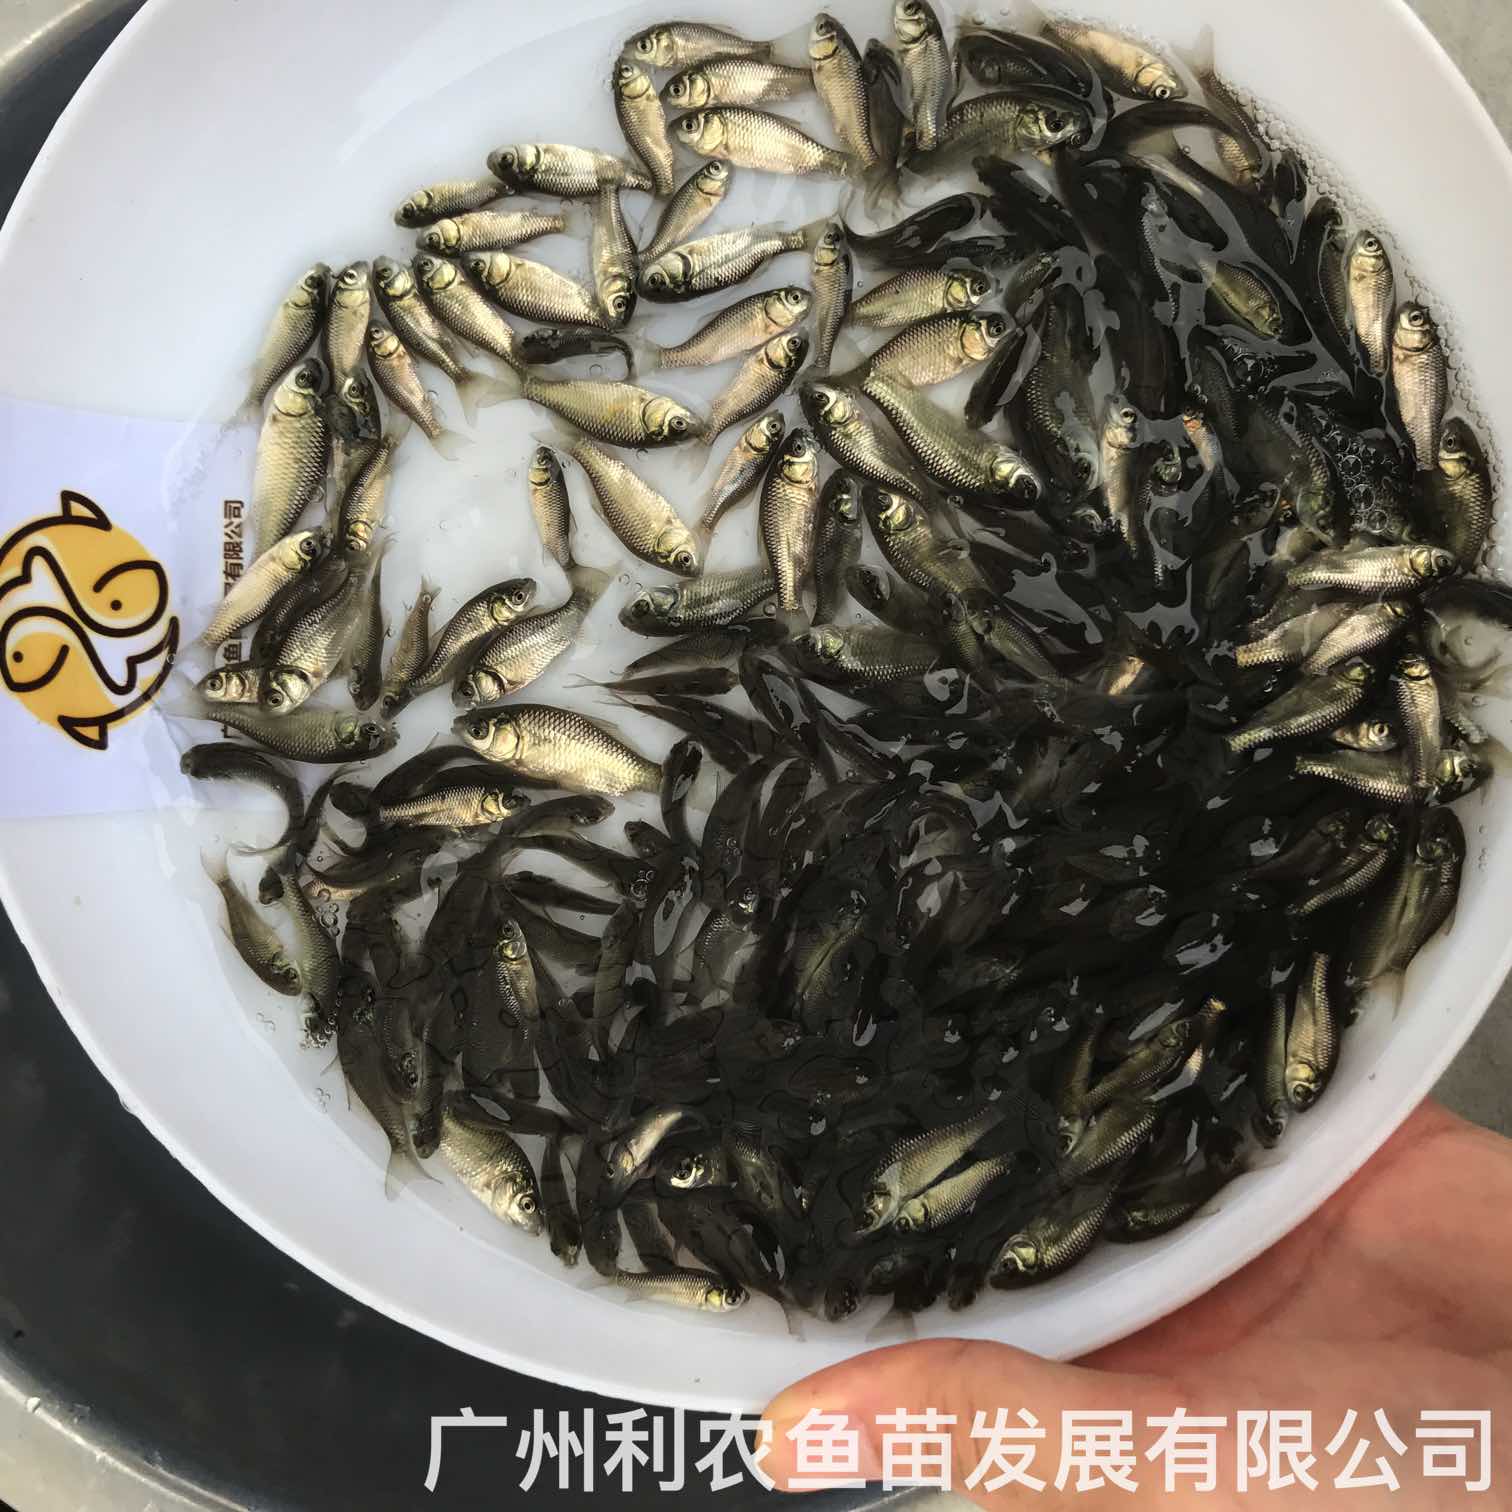 Wholesale of Zhongke No.5 and No.3 crucian carp fry can grow one kilogram in half a year, and can be shipped nationwide with cold resistance and fast growth